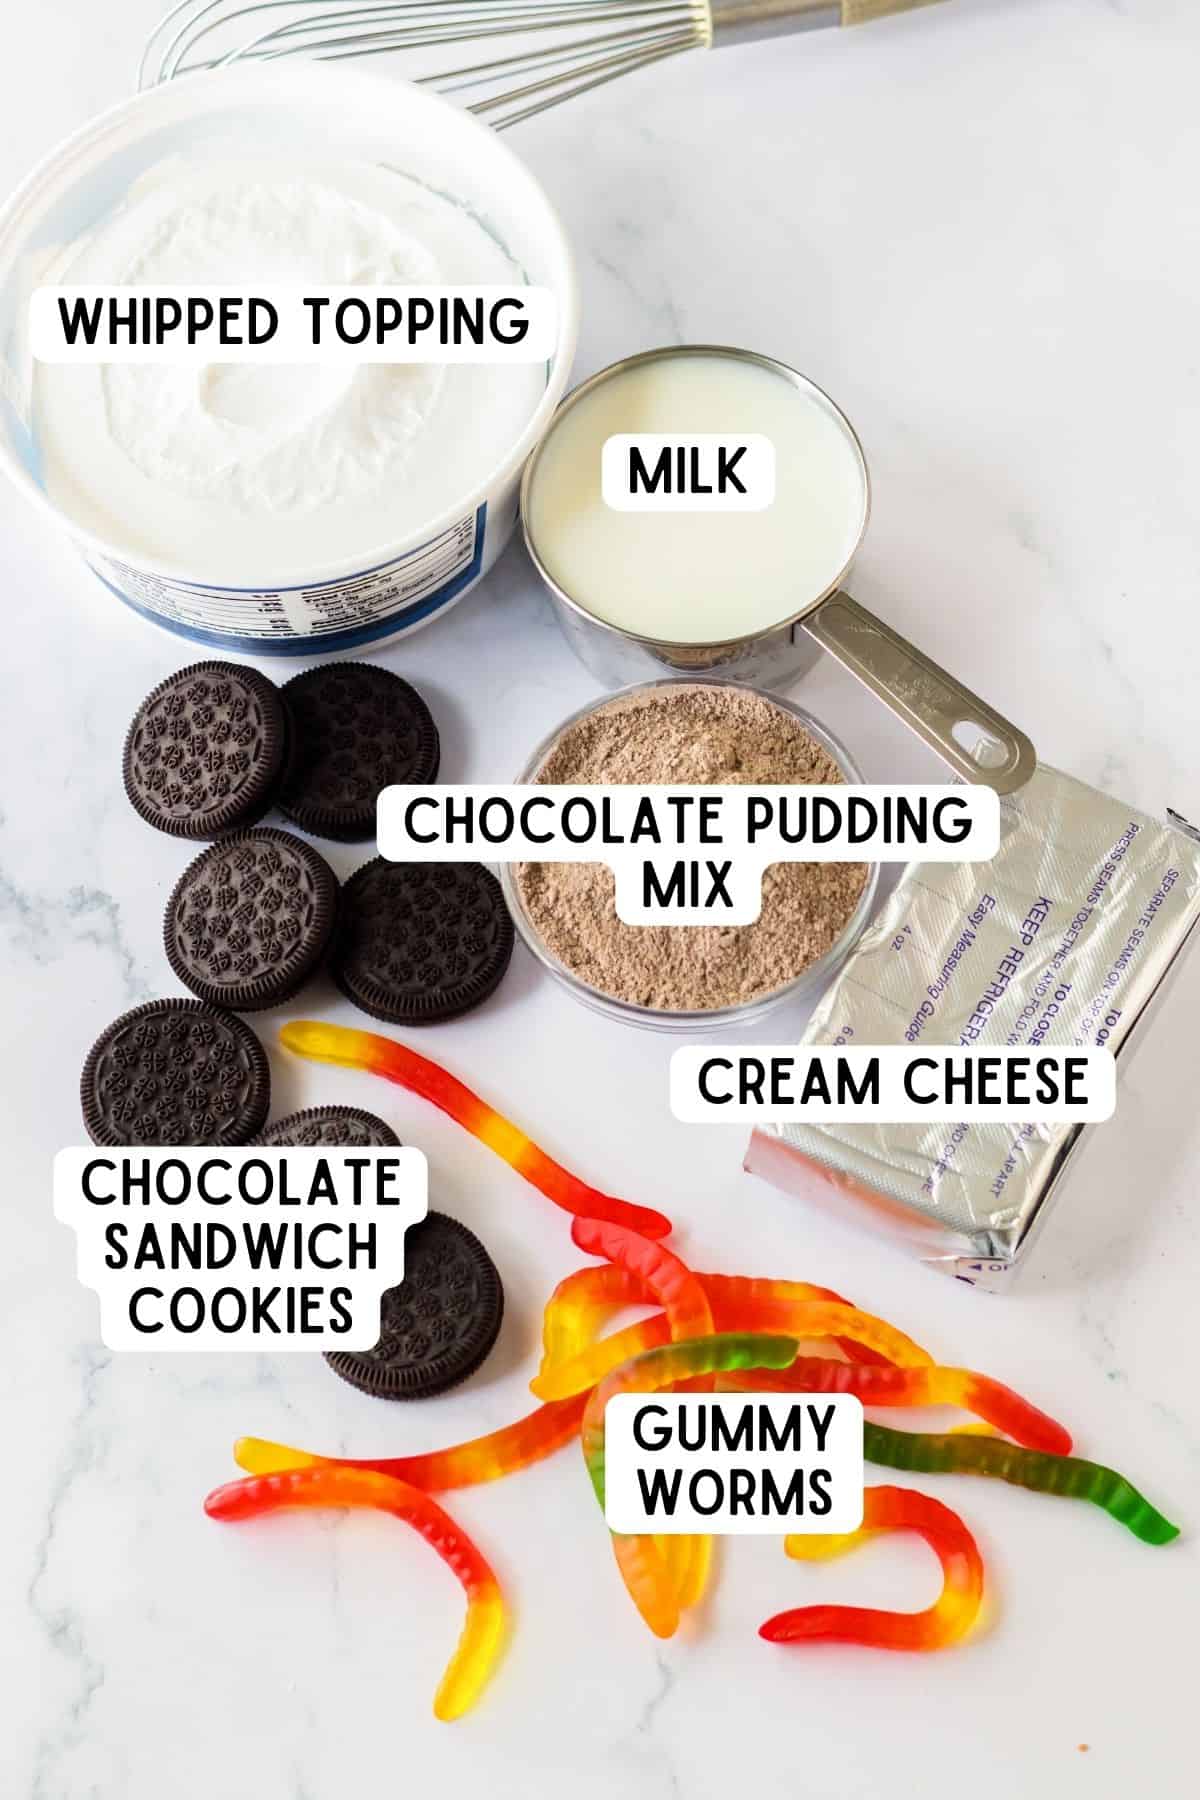 Ingredients for dirt and worms pudding - whipped topping, milk, chocolate pudding mix, chocolate sandwich cookies, cream cheese, and gummy worms.